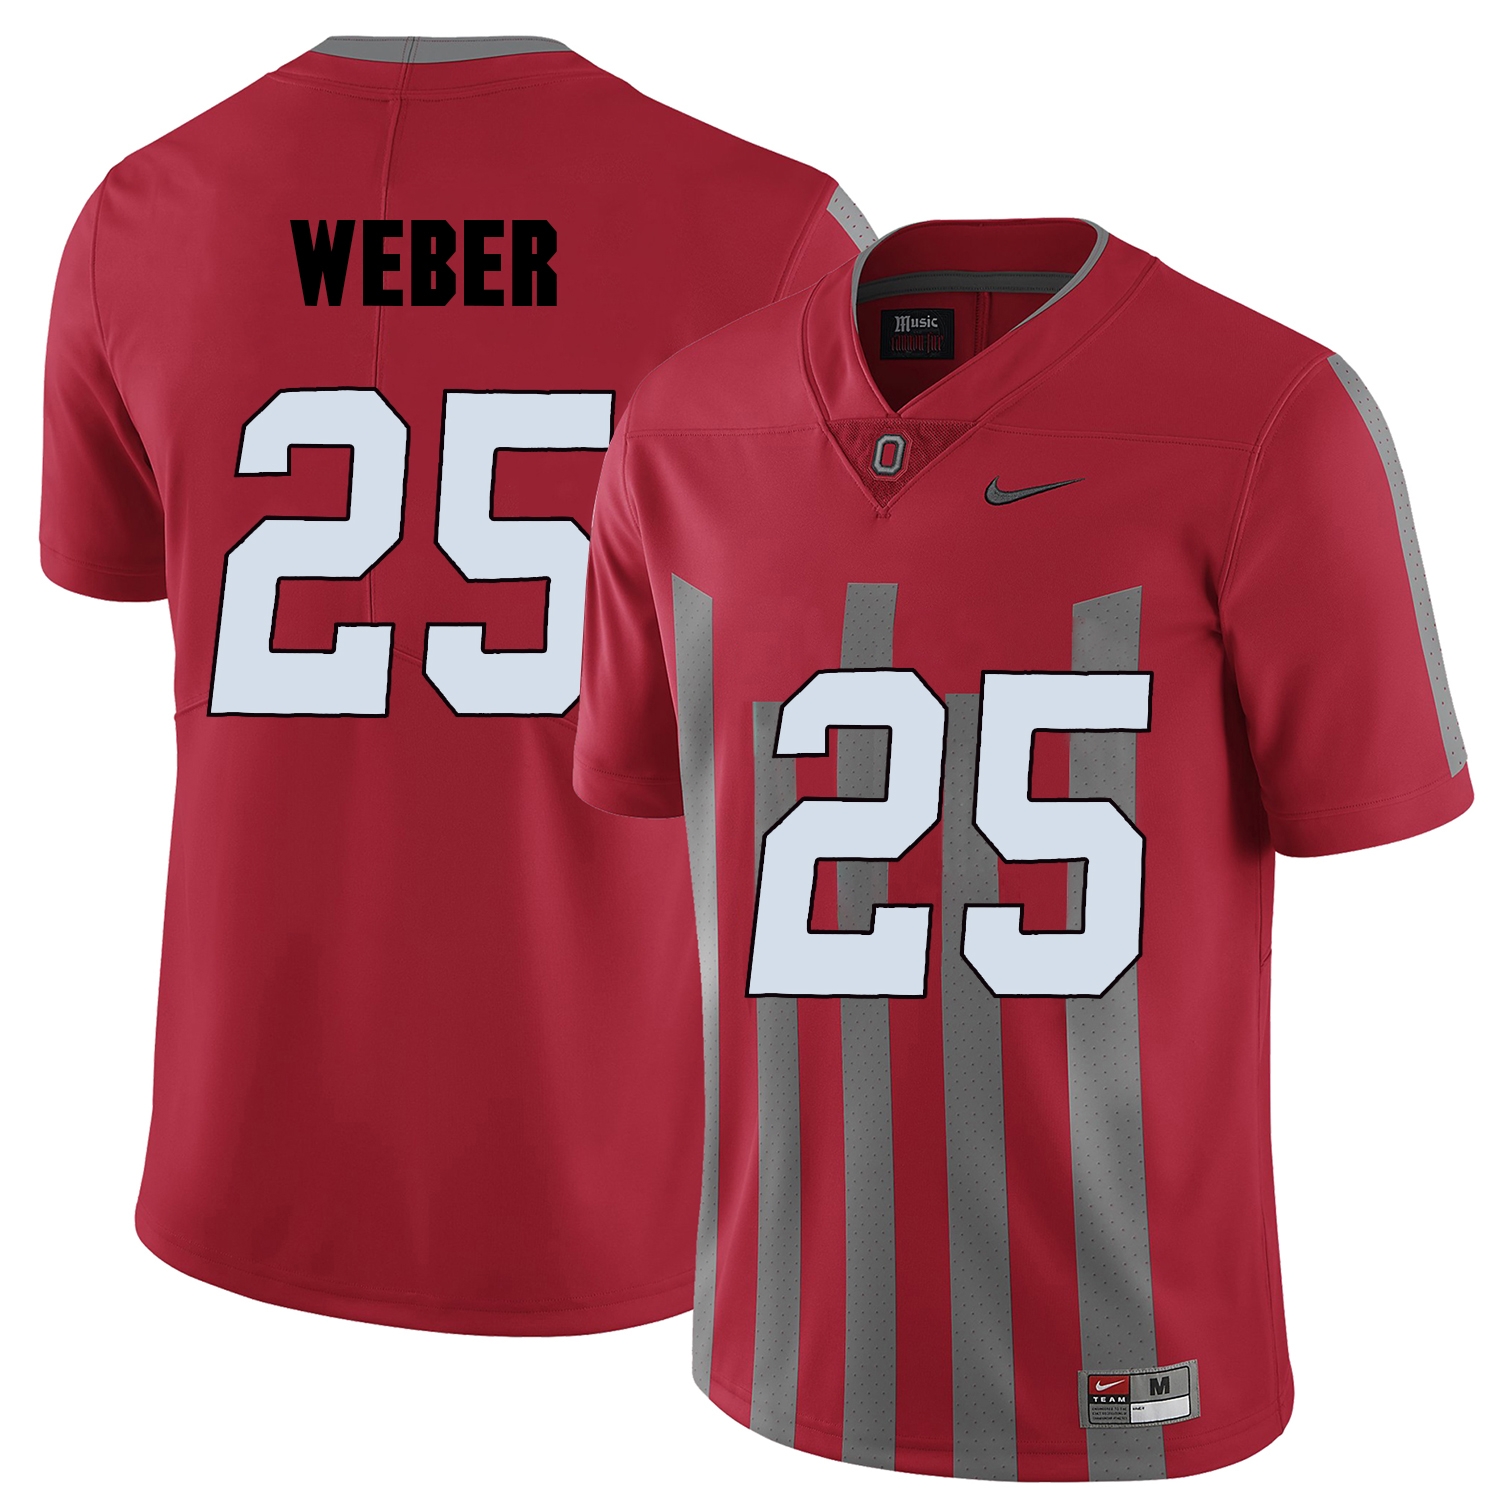 Ohio State Buckeyes Men's NCAA Mike Weber #25 Red Elite College Football Jersey SIK6049ZD